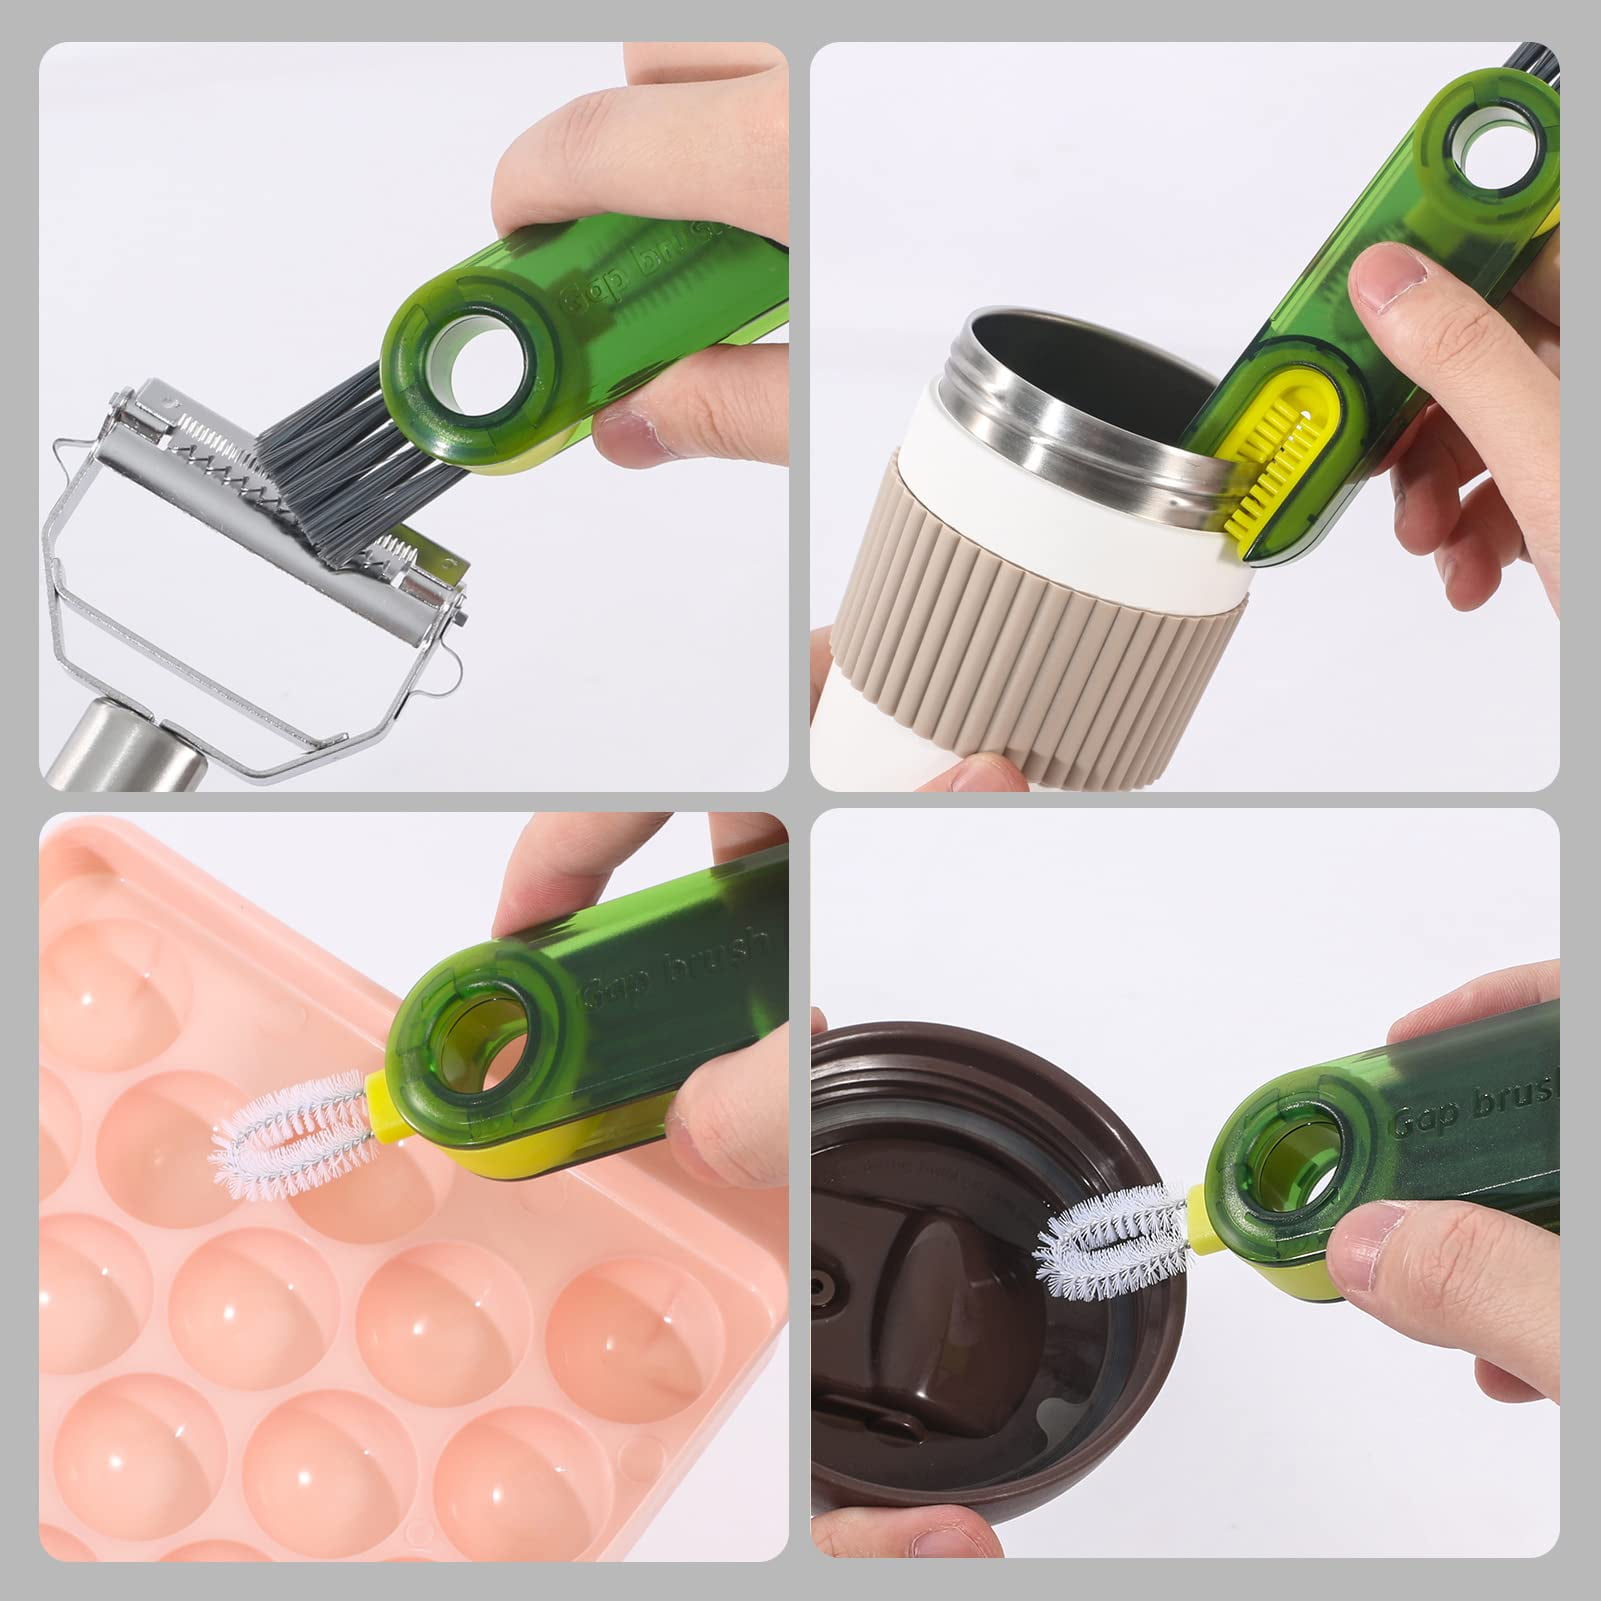 Neioaas 3pcs 3 in 1 Multifunctional Cleaning Brush, Multi-functional Insulation Cup Crevice Cleaning Tools,3 in 1cup Lid Cleaning Brush Set